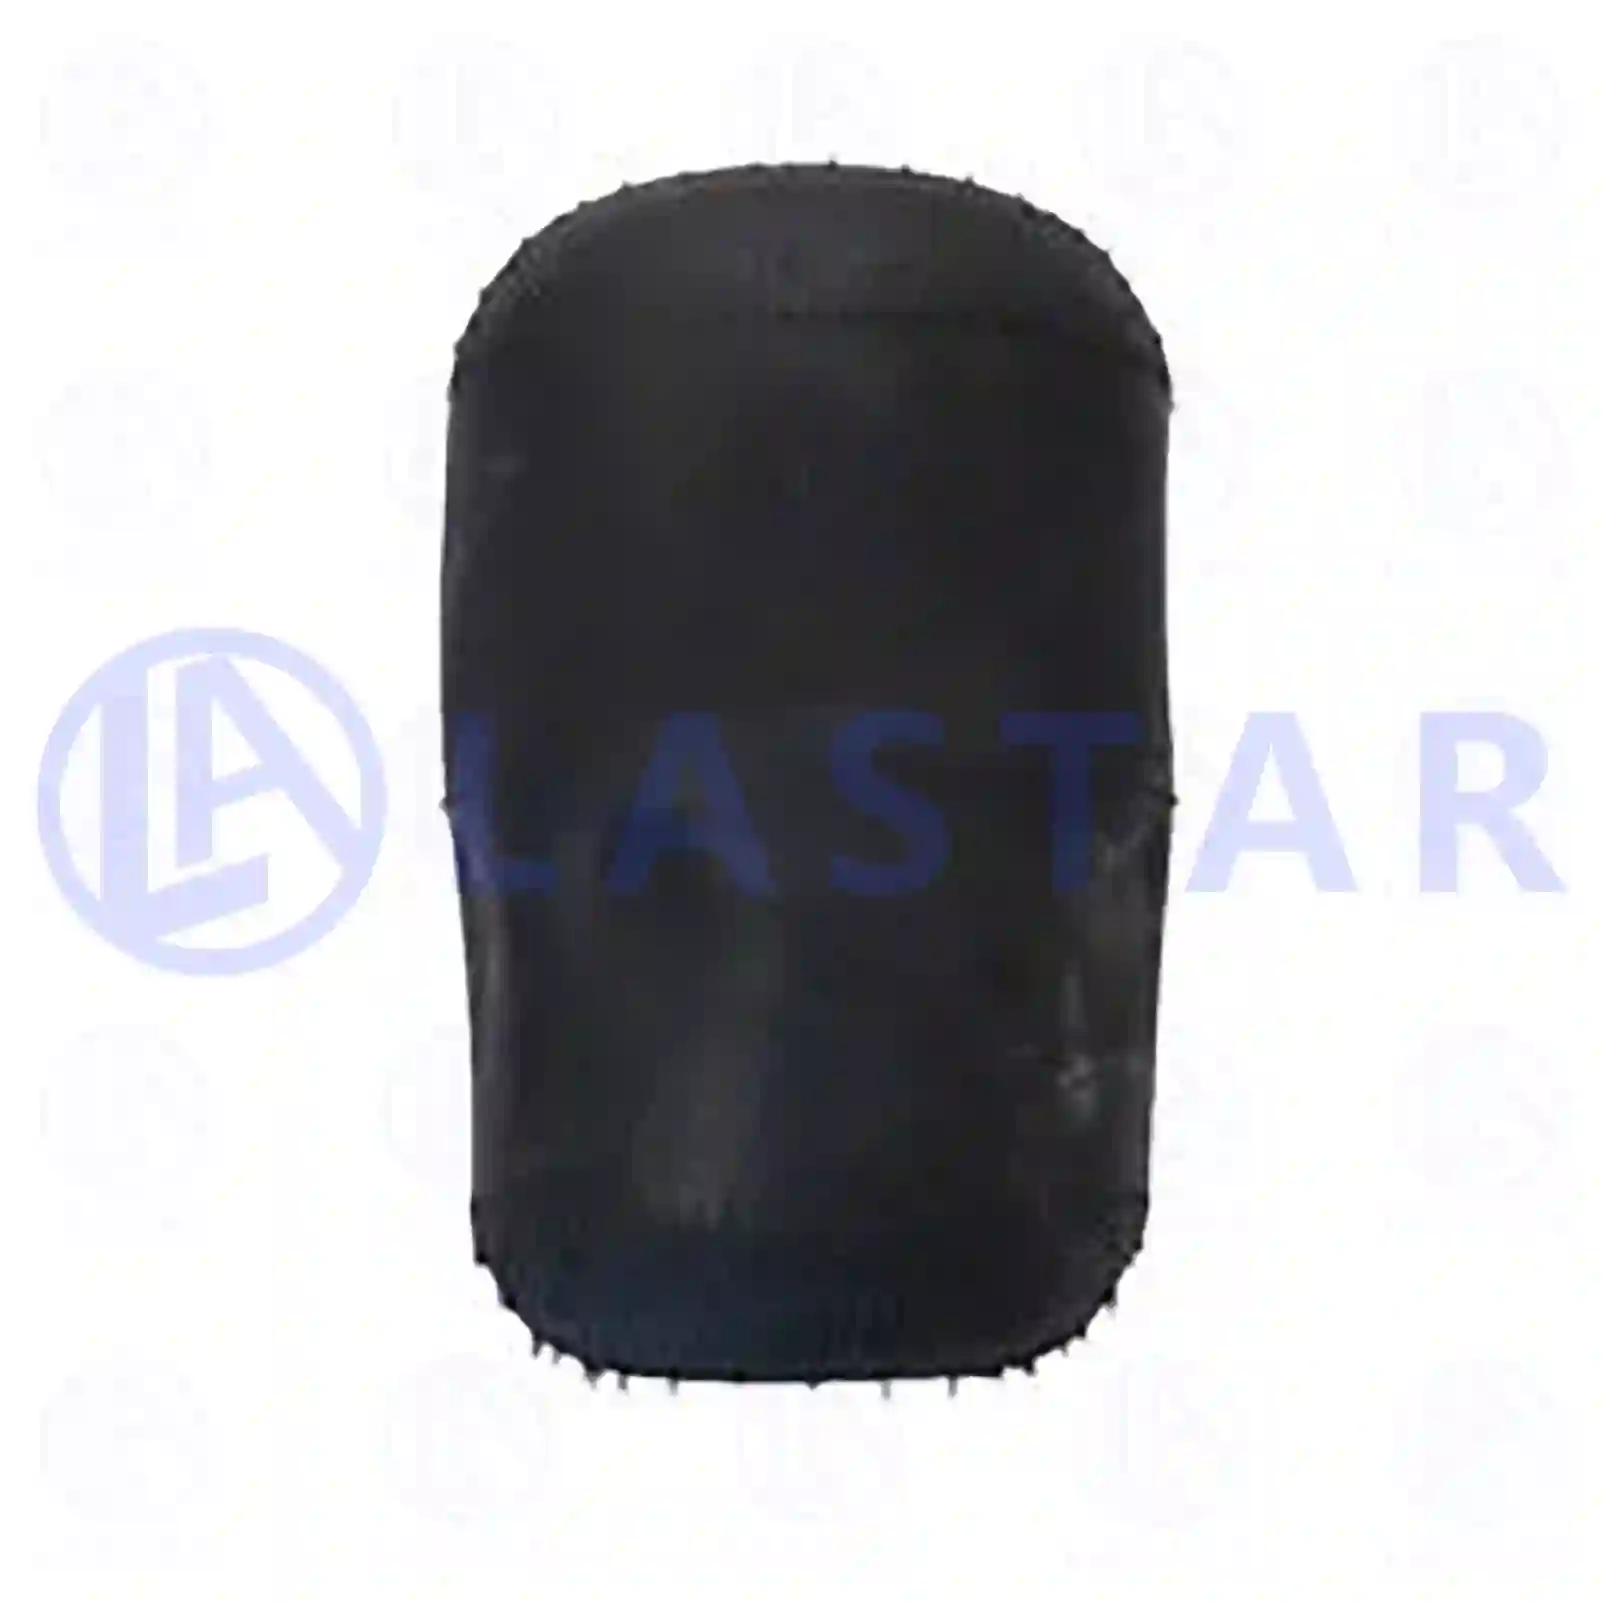 Air spring, without piston, 77729303, 500055043, 98411807, ZG40840-0008, ||  77729303 Lastar Spare Part | Truck Spare Parts, Auotomotive Spare Parts Air spring, without piston, 77729303, 500055043, 98411807, ZG40840-0008, ||  77729303 Lastar Spare Part | Truck Spare Parts, Auotomotive Spare Parts